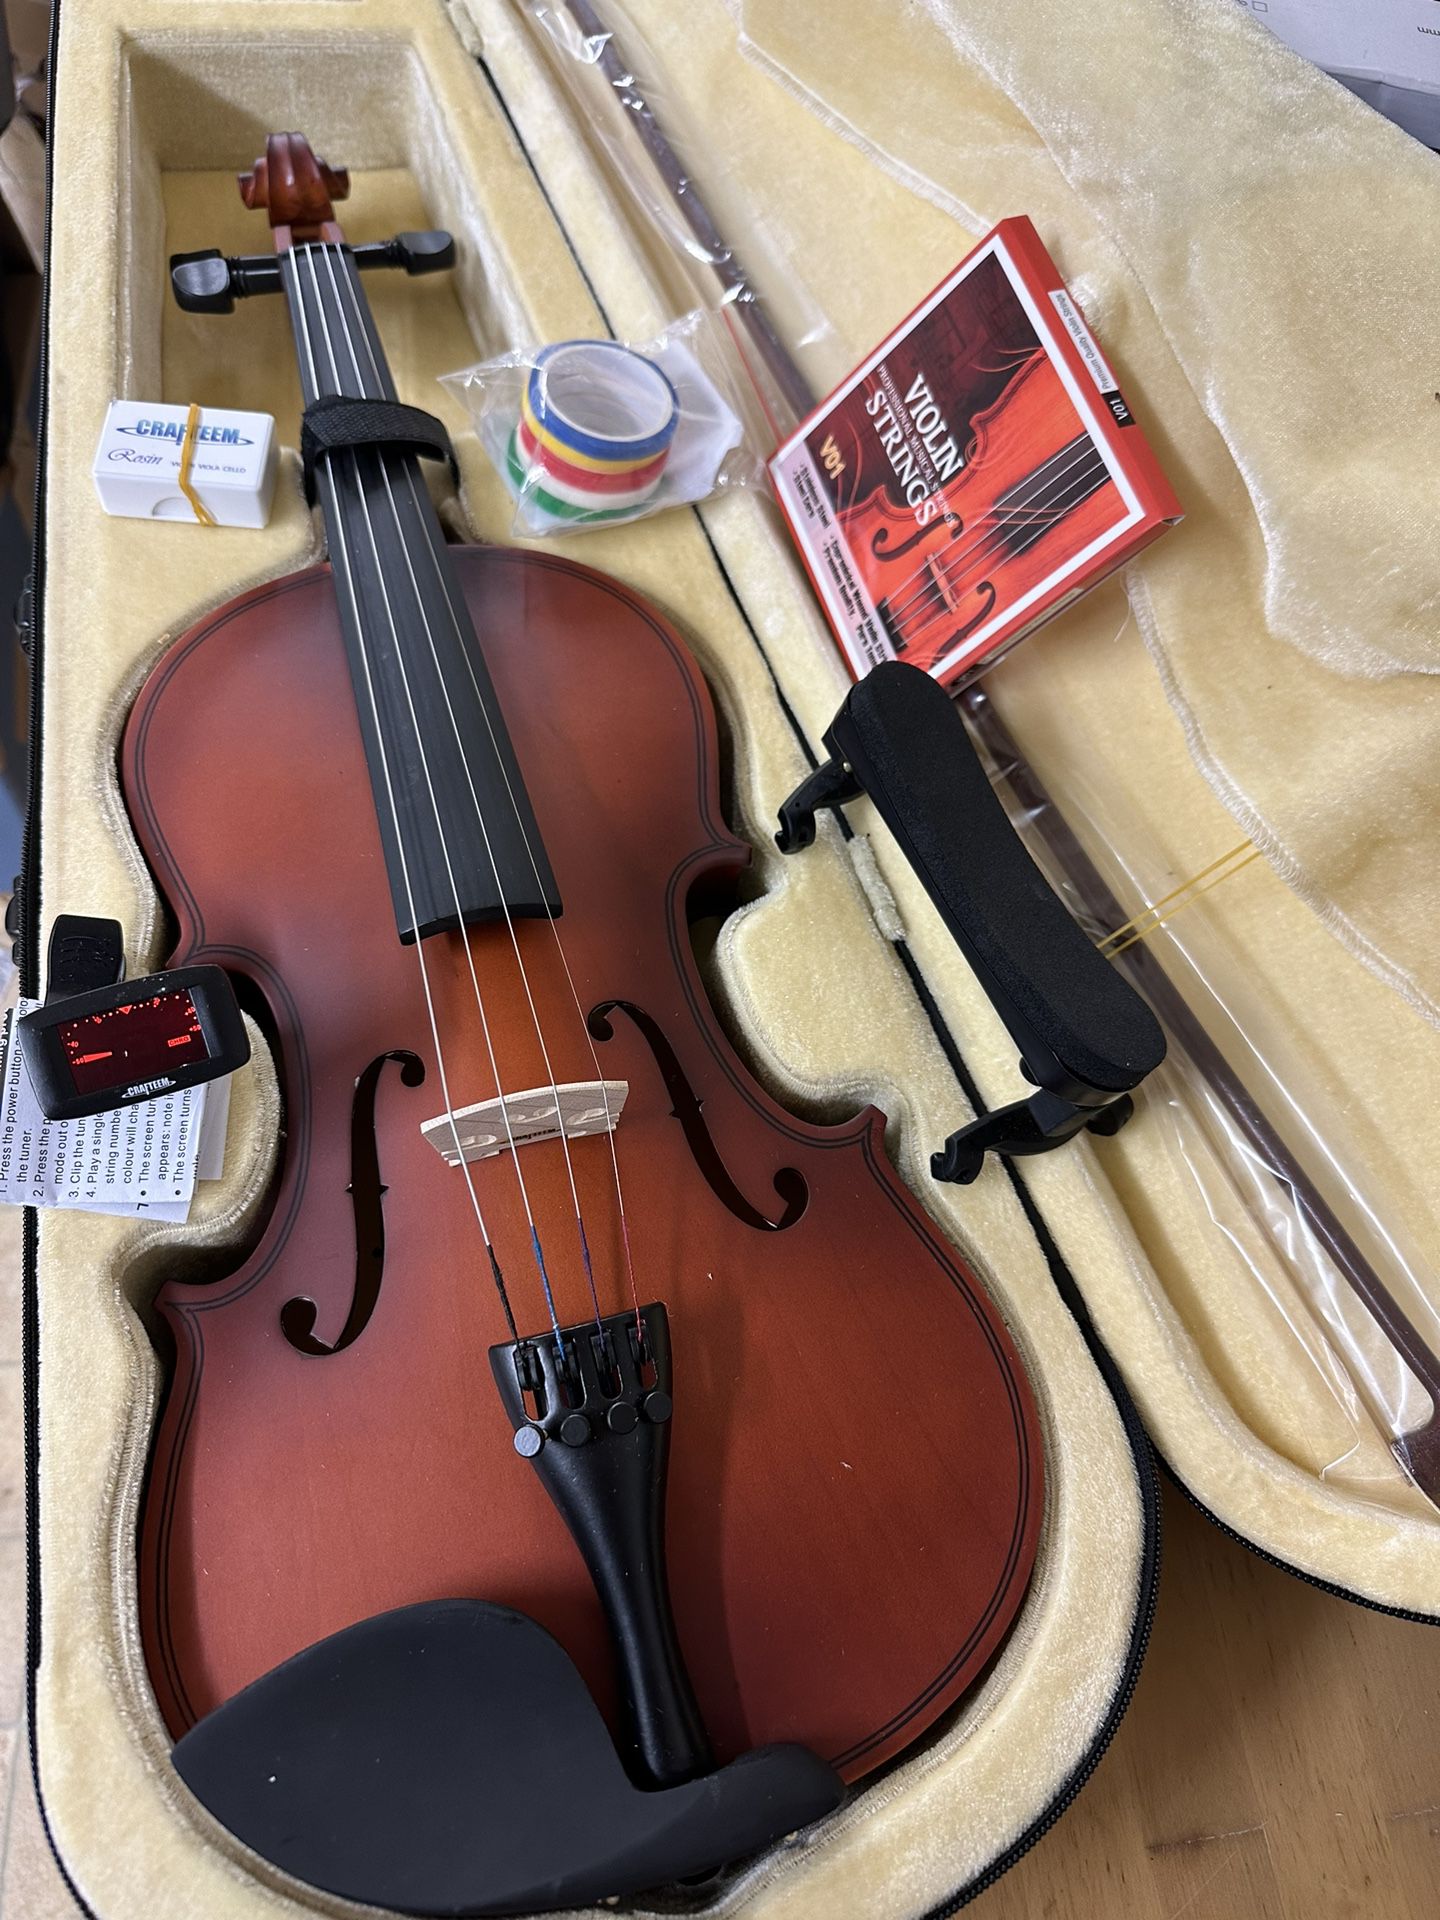 Beautiful 4/4 Violin with New Bow, Digital Tuner, Shoulder Rest, Extra Strings $150 Firm